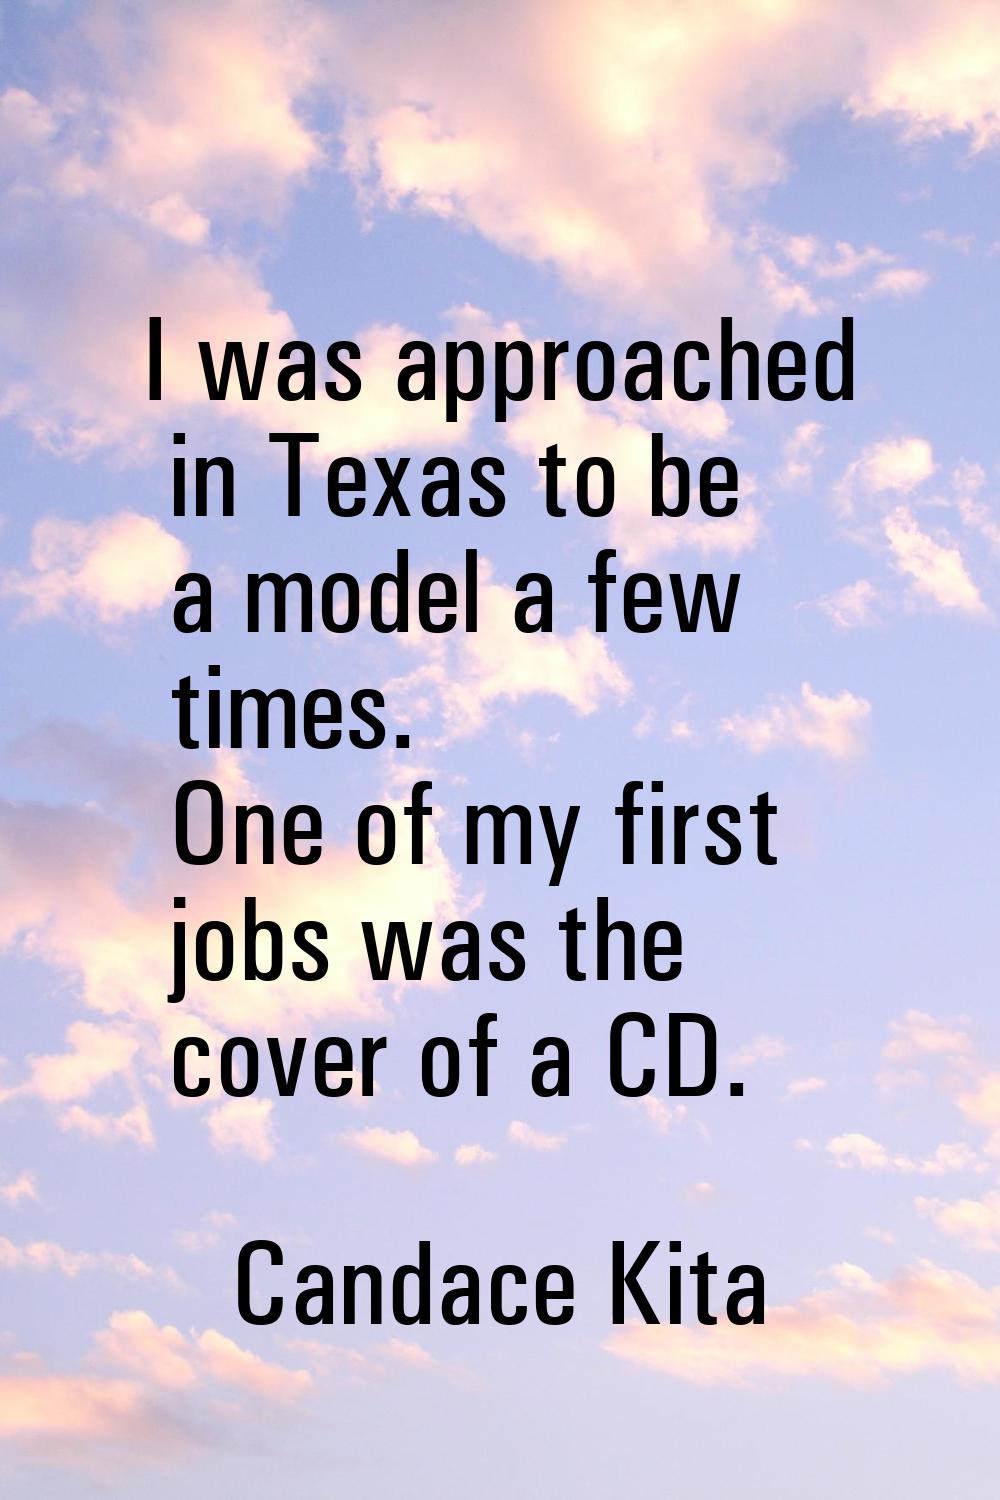 I was approached in Texas to be a model a few times. One of my first jobs was the cover of a CD.